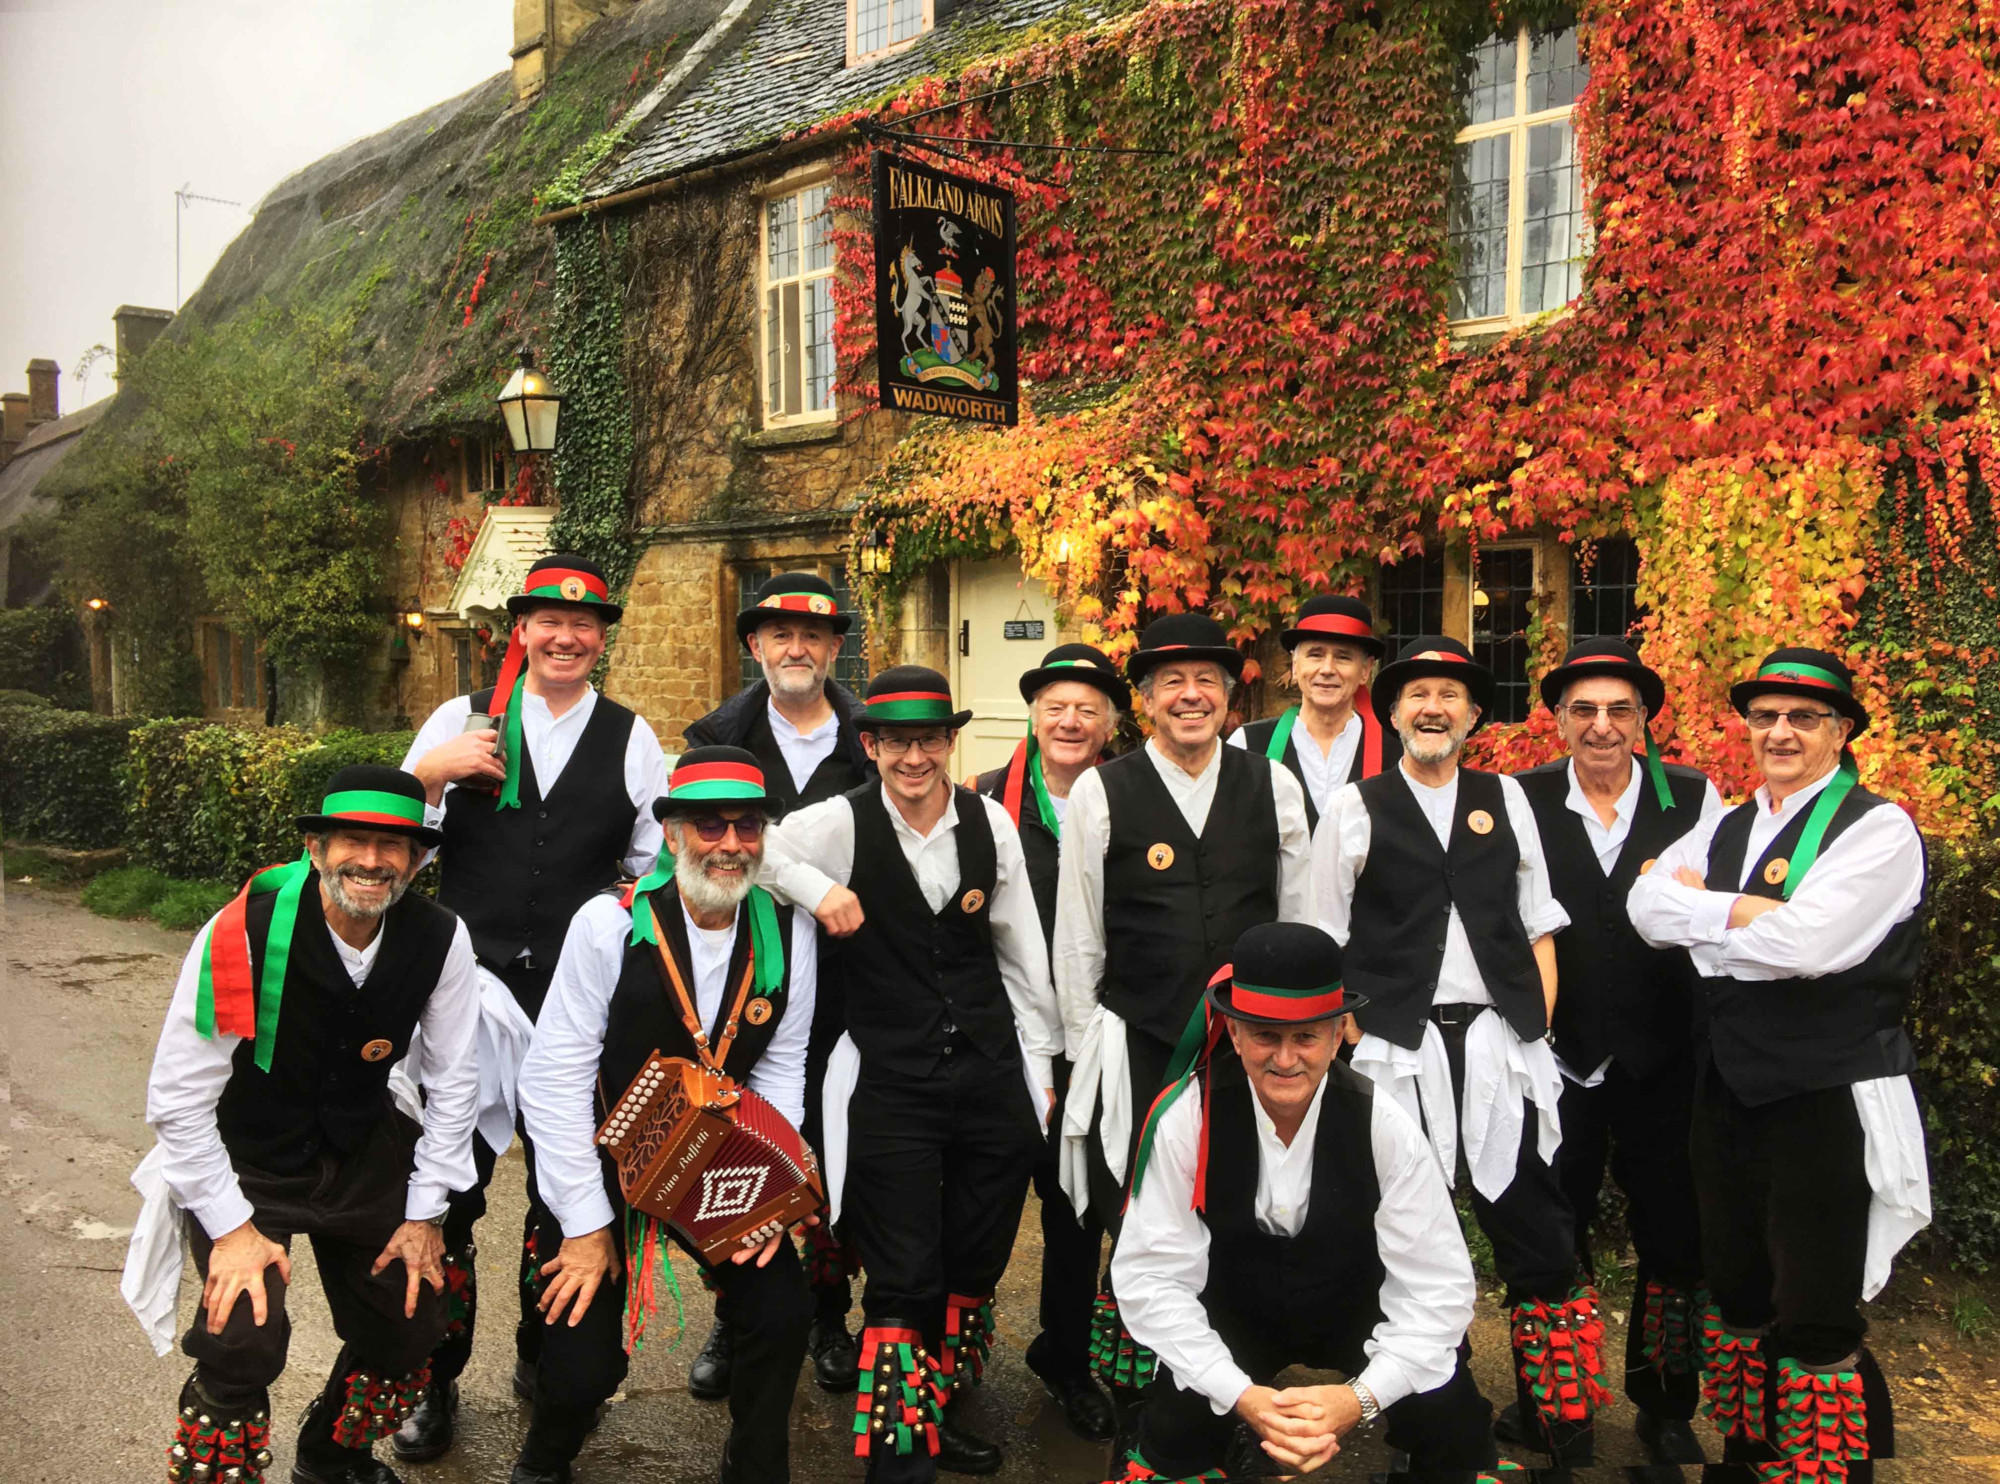 the entire holt morris outside The Falkland Arms at Great Tew